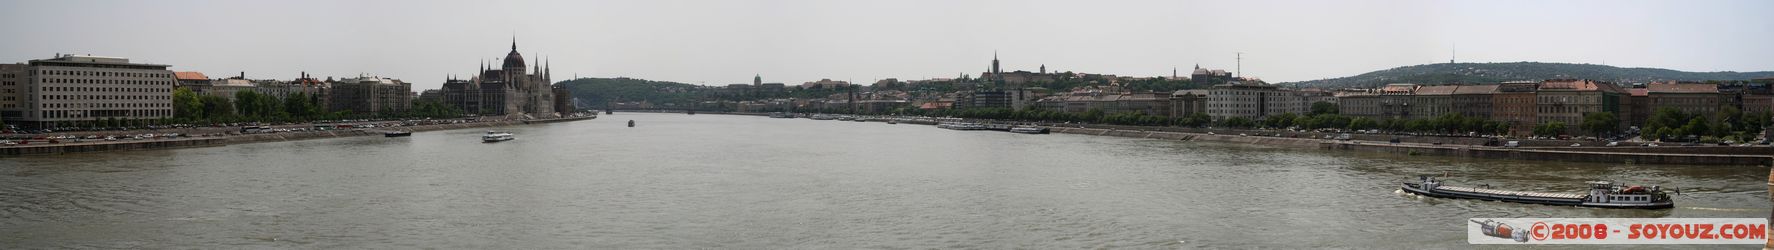 Budapest - Margit-sziget - panorama on the Danube
Mots-clés: panorama Danube Riviere